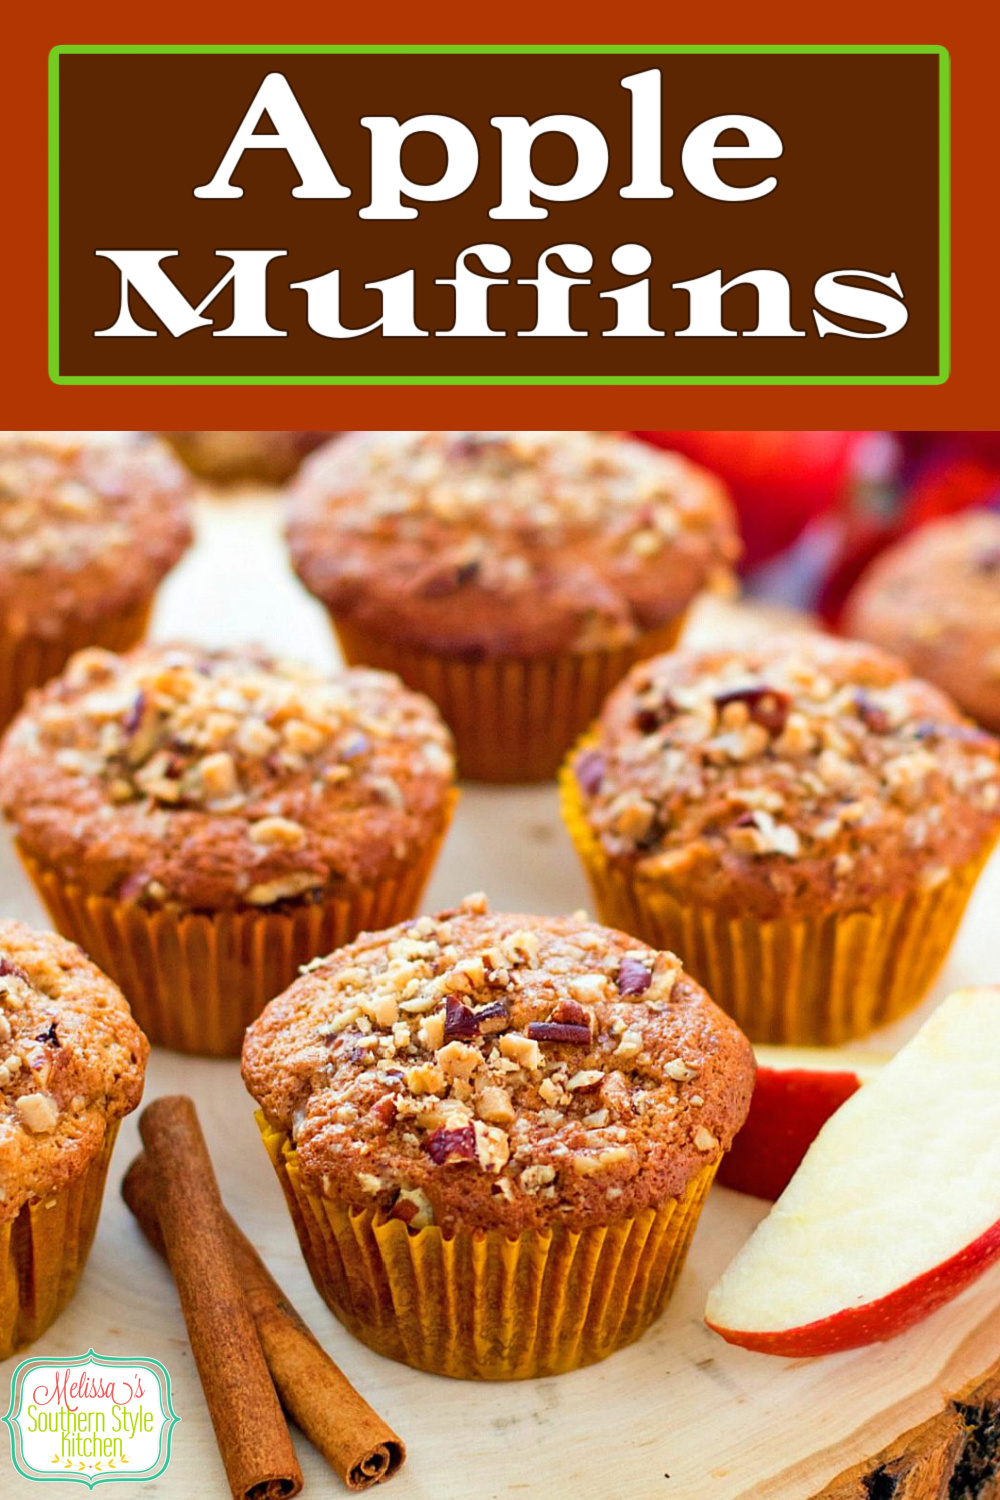 There's nothing like a fresh from the oven Apple Muffin for breakfast, brunch or a mid-afternoon treat! #applemuffins #apples #muffins #streuseltoppedmuffins #pecans #applerecipes #brunch #breakfast #fallbaking #thanksgiving #holidaybrunch #teatime #holidaybaking #southernfood #southernrecipes via @melissasssk